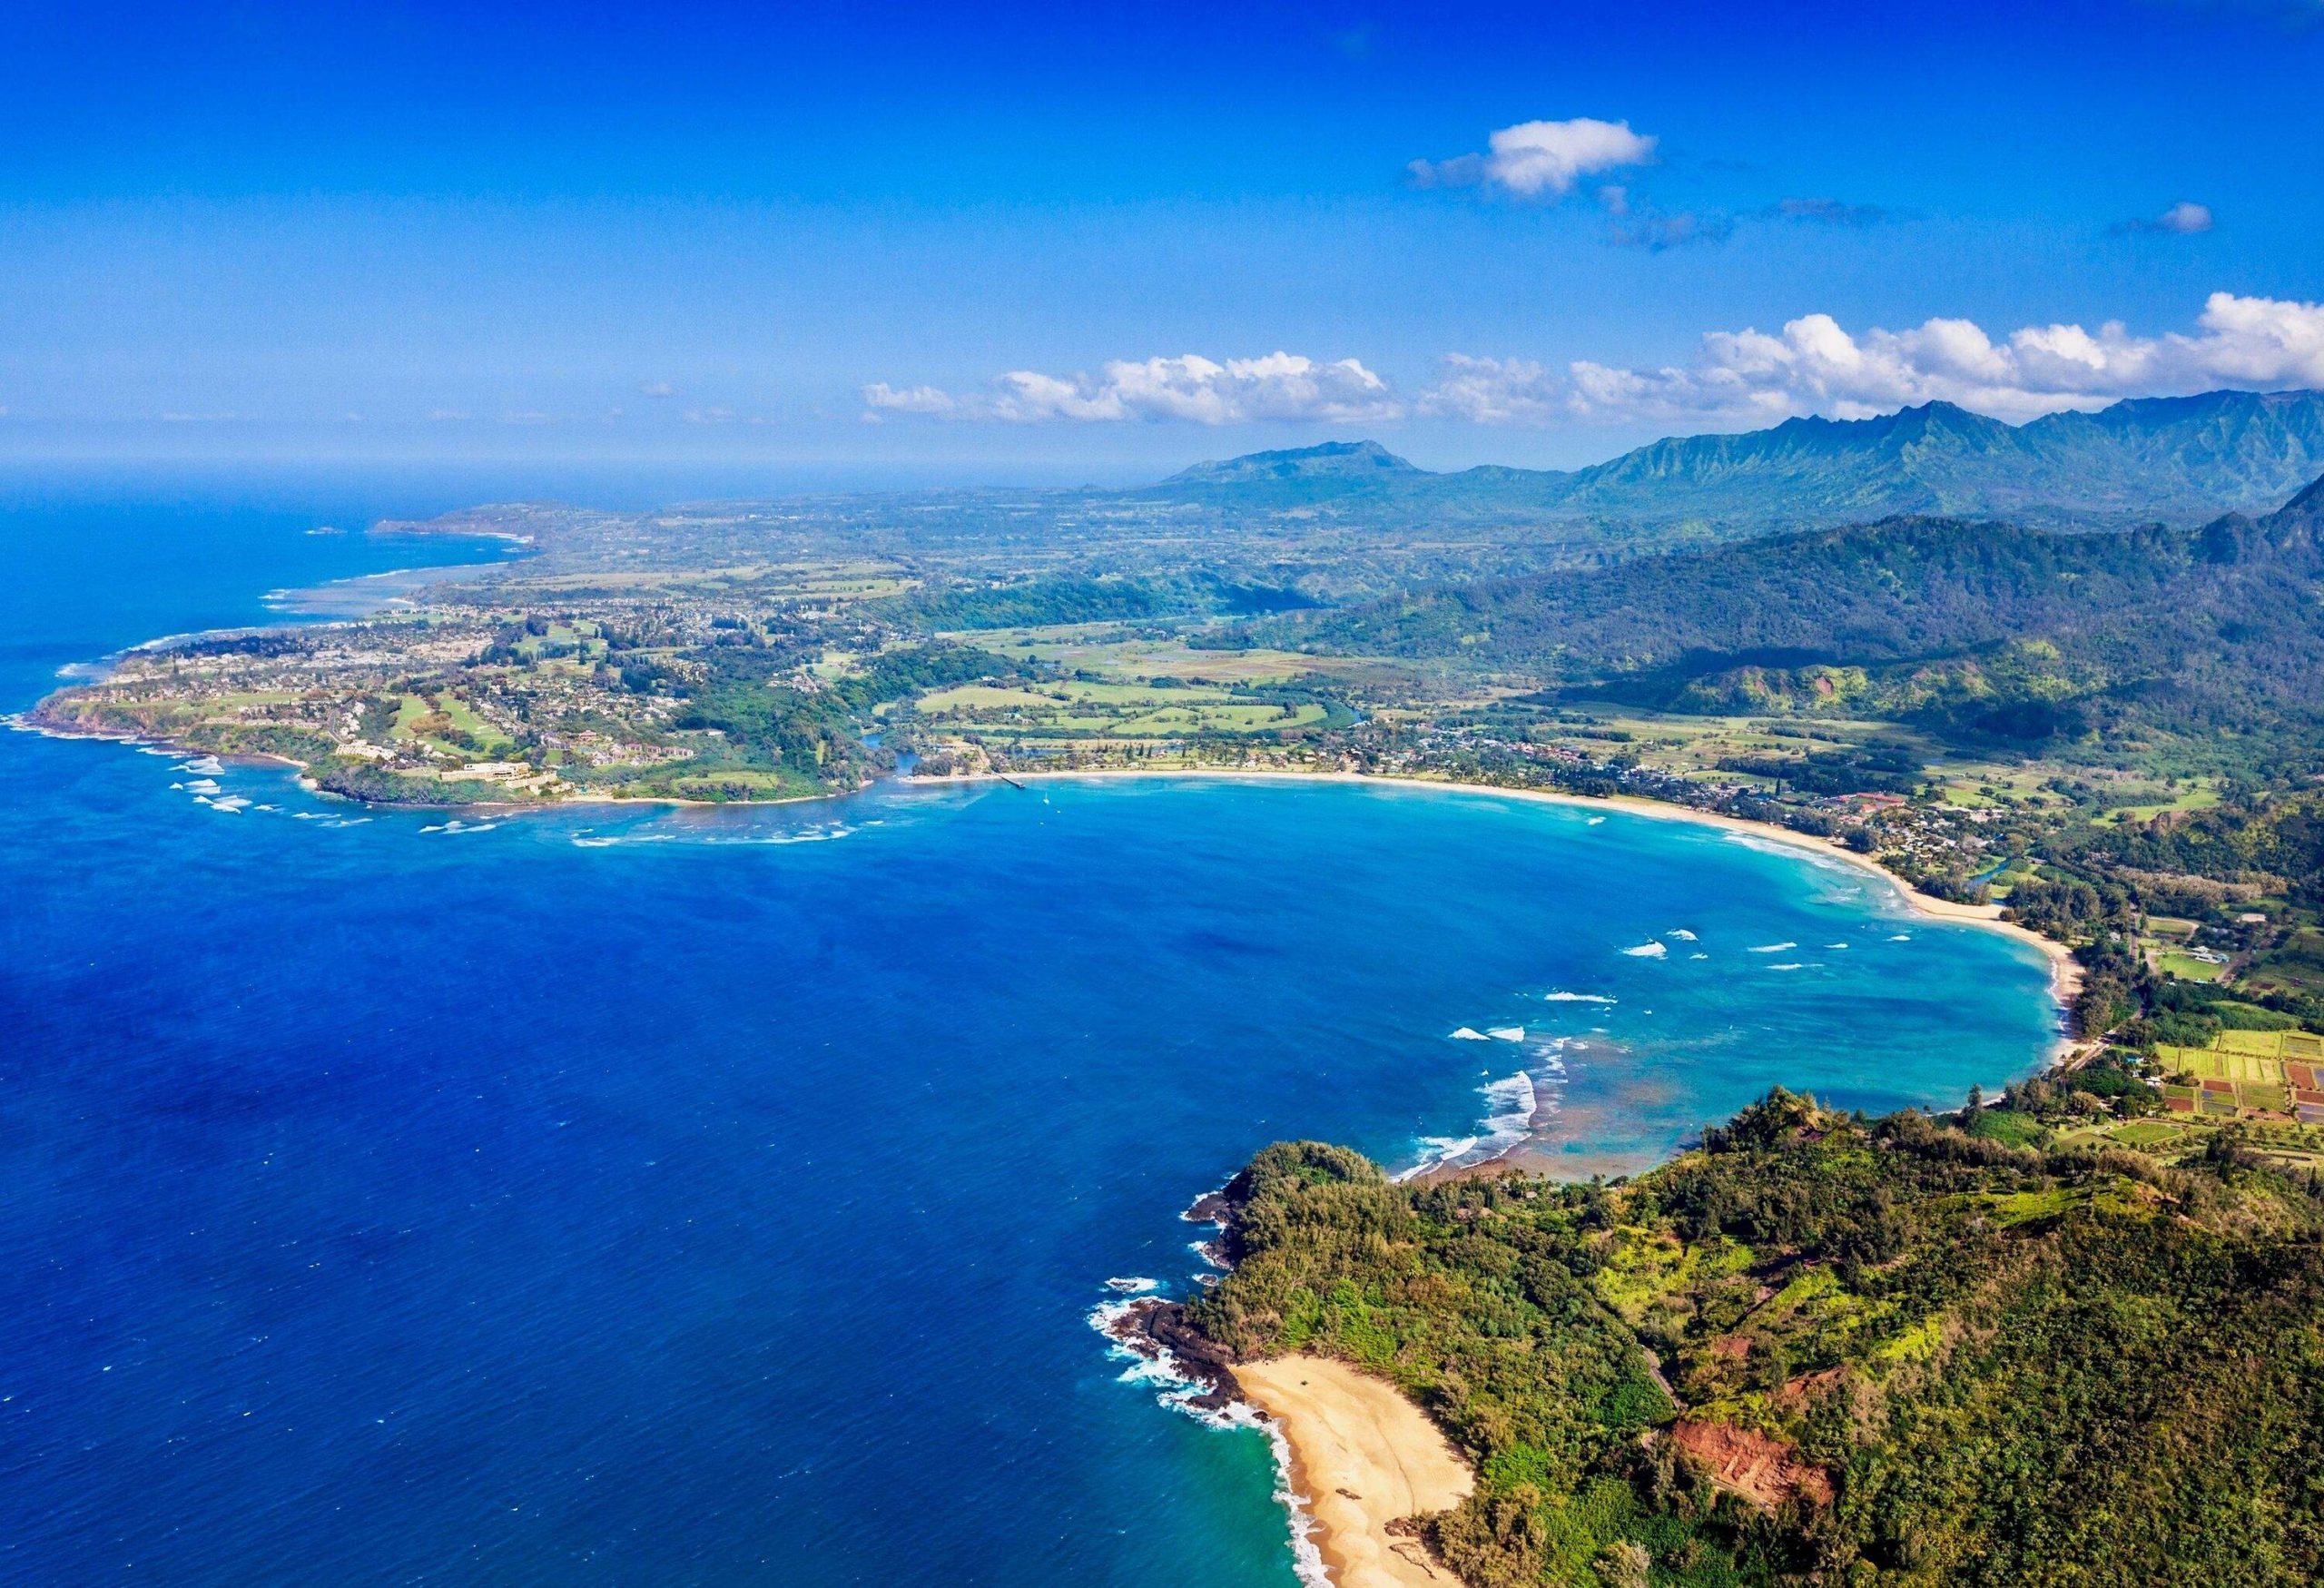 Aerial view of a lush coastal island surrounded by the blue sea under the cloudy blue sky.